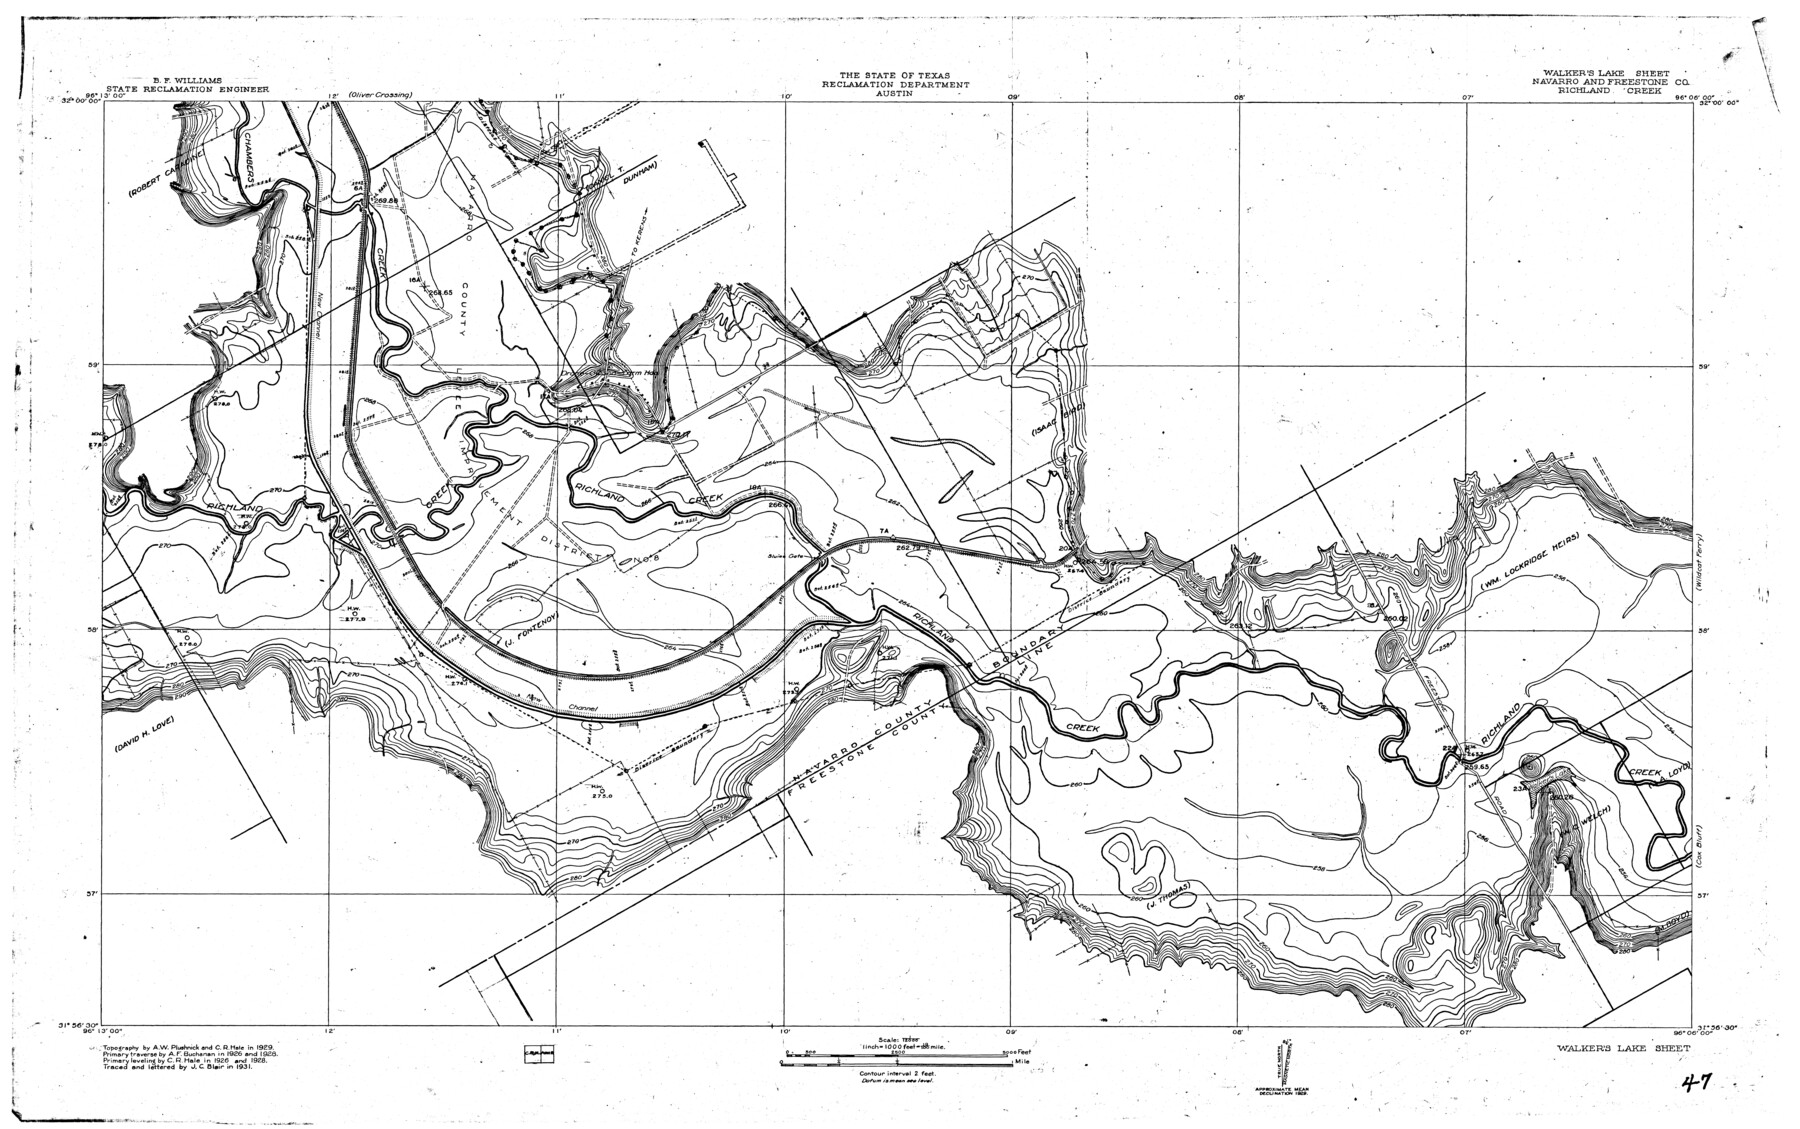 65226, Trinity River, Walker's Lake Sheet/Richland Creek, General Map Collection